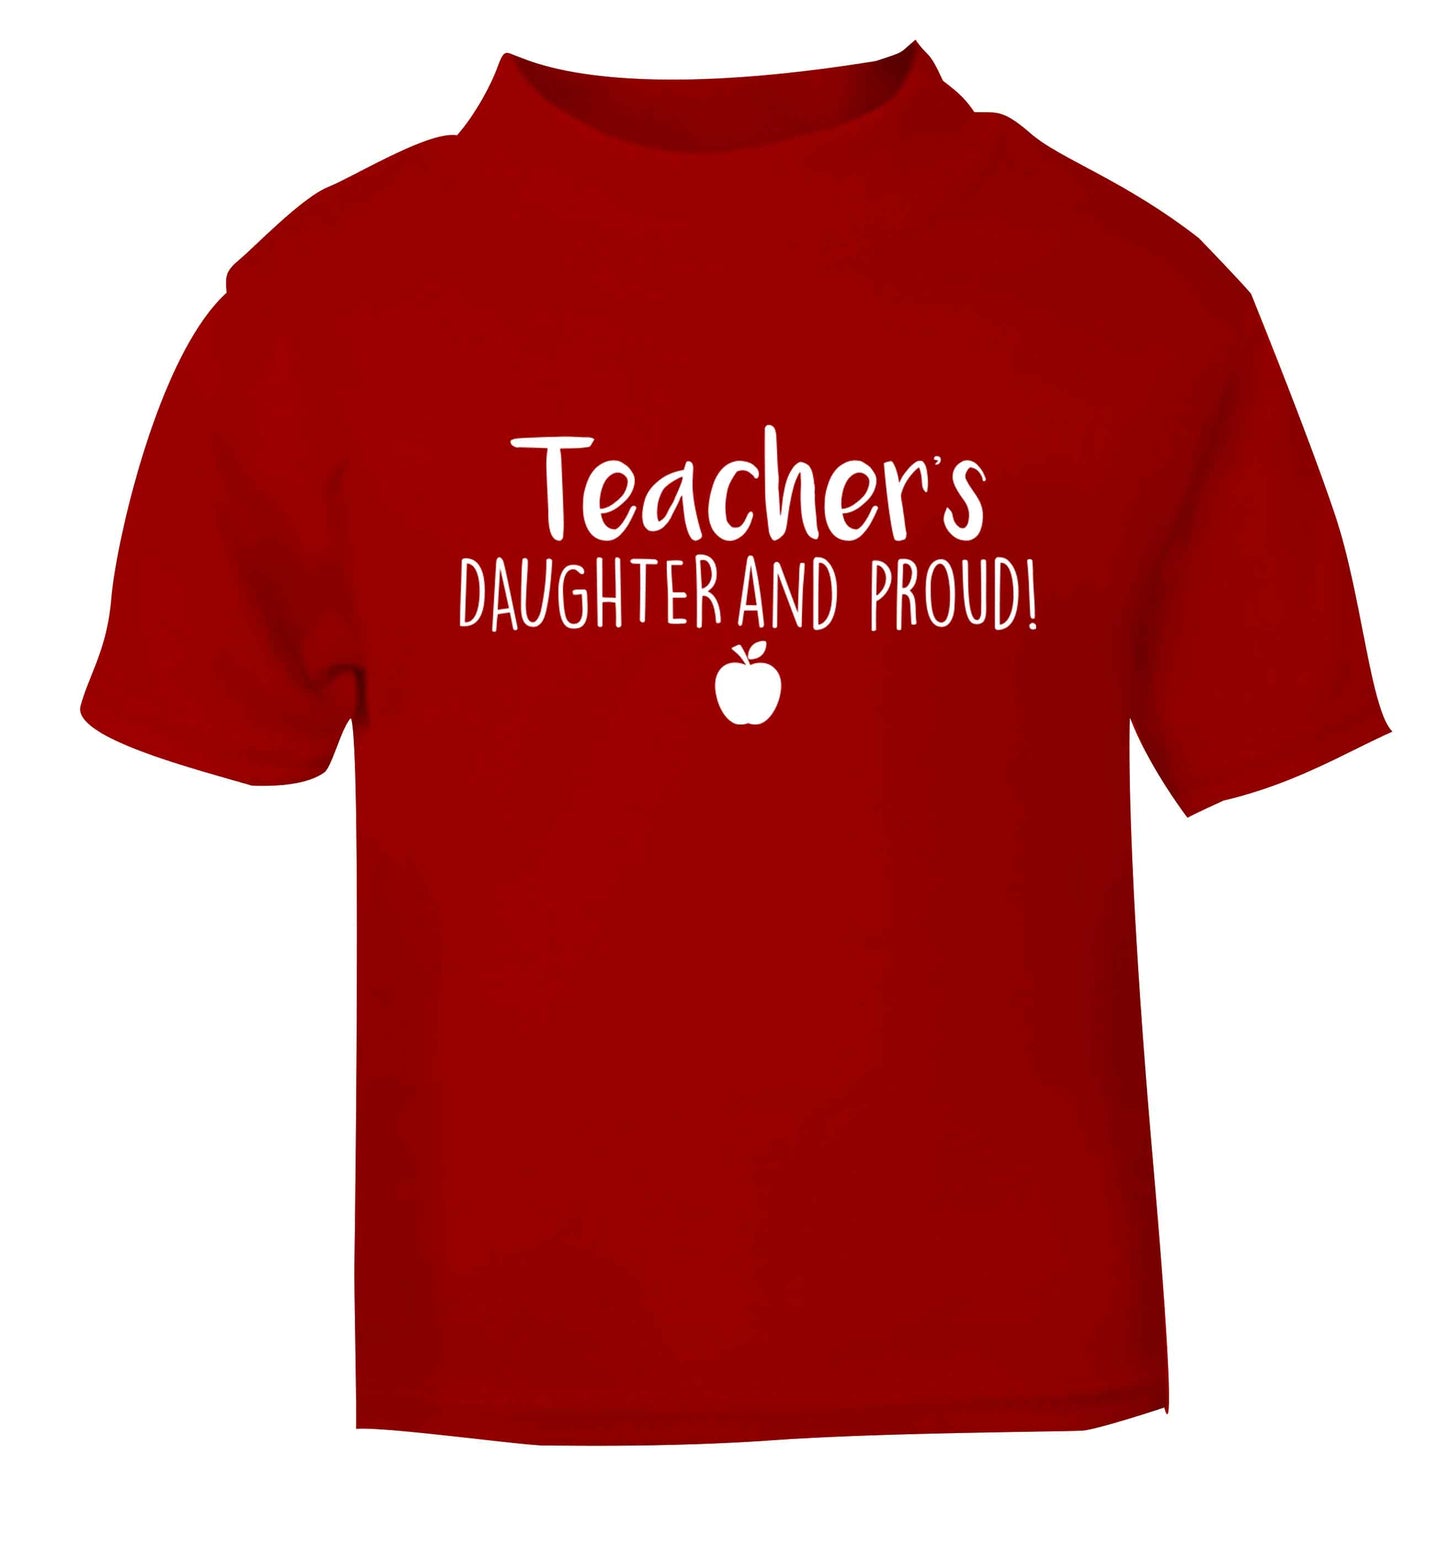 Teachers daughter and proud red baby toddler Tshirt 2 Years